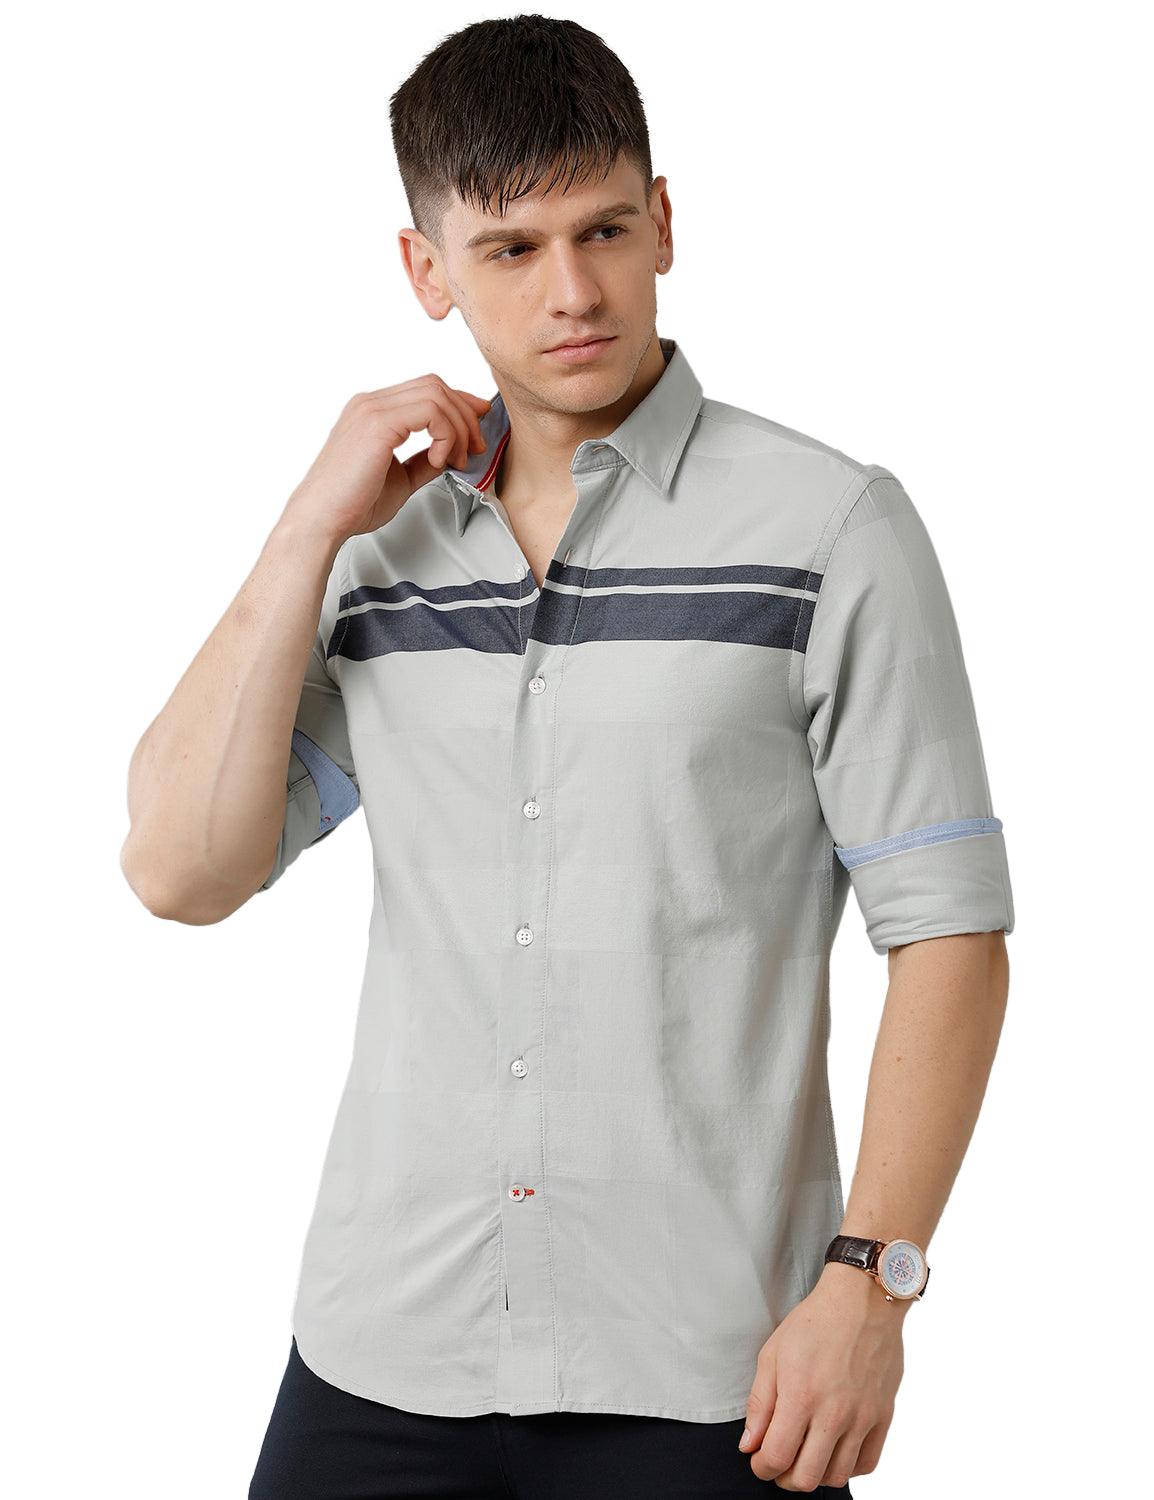 Pista Green Engineering Stripes Casual Shirt - Double Two